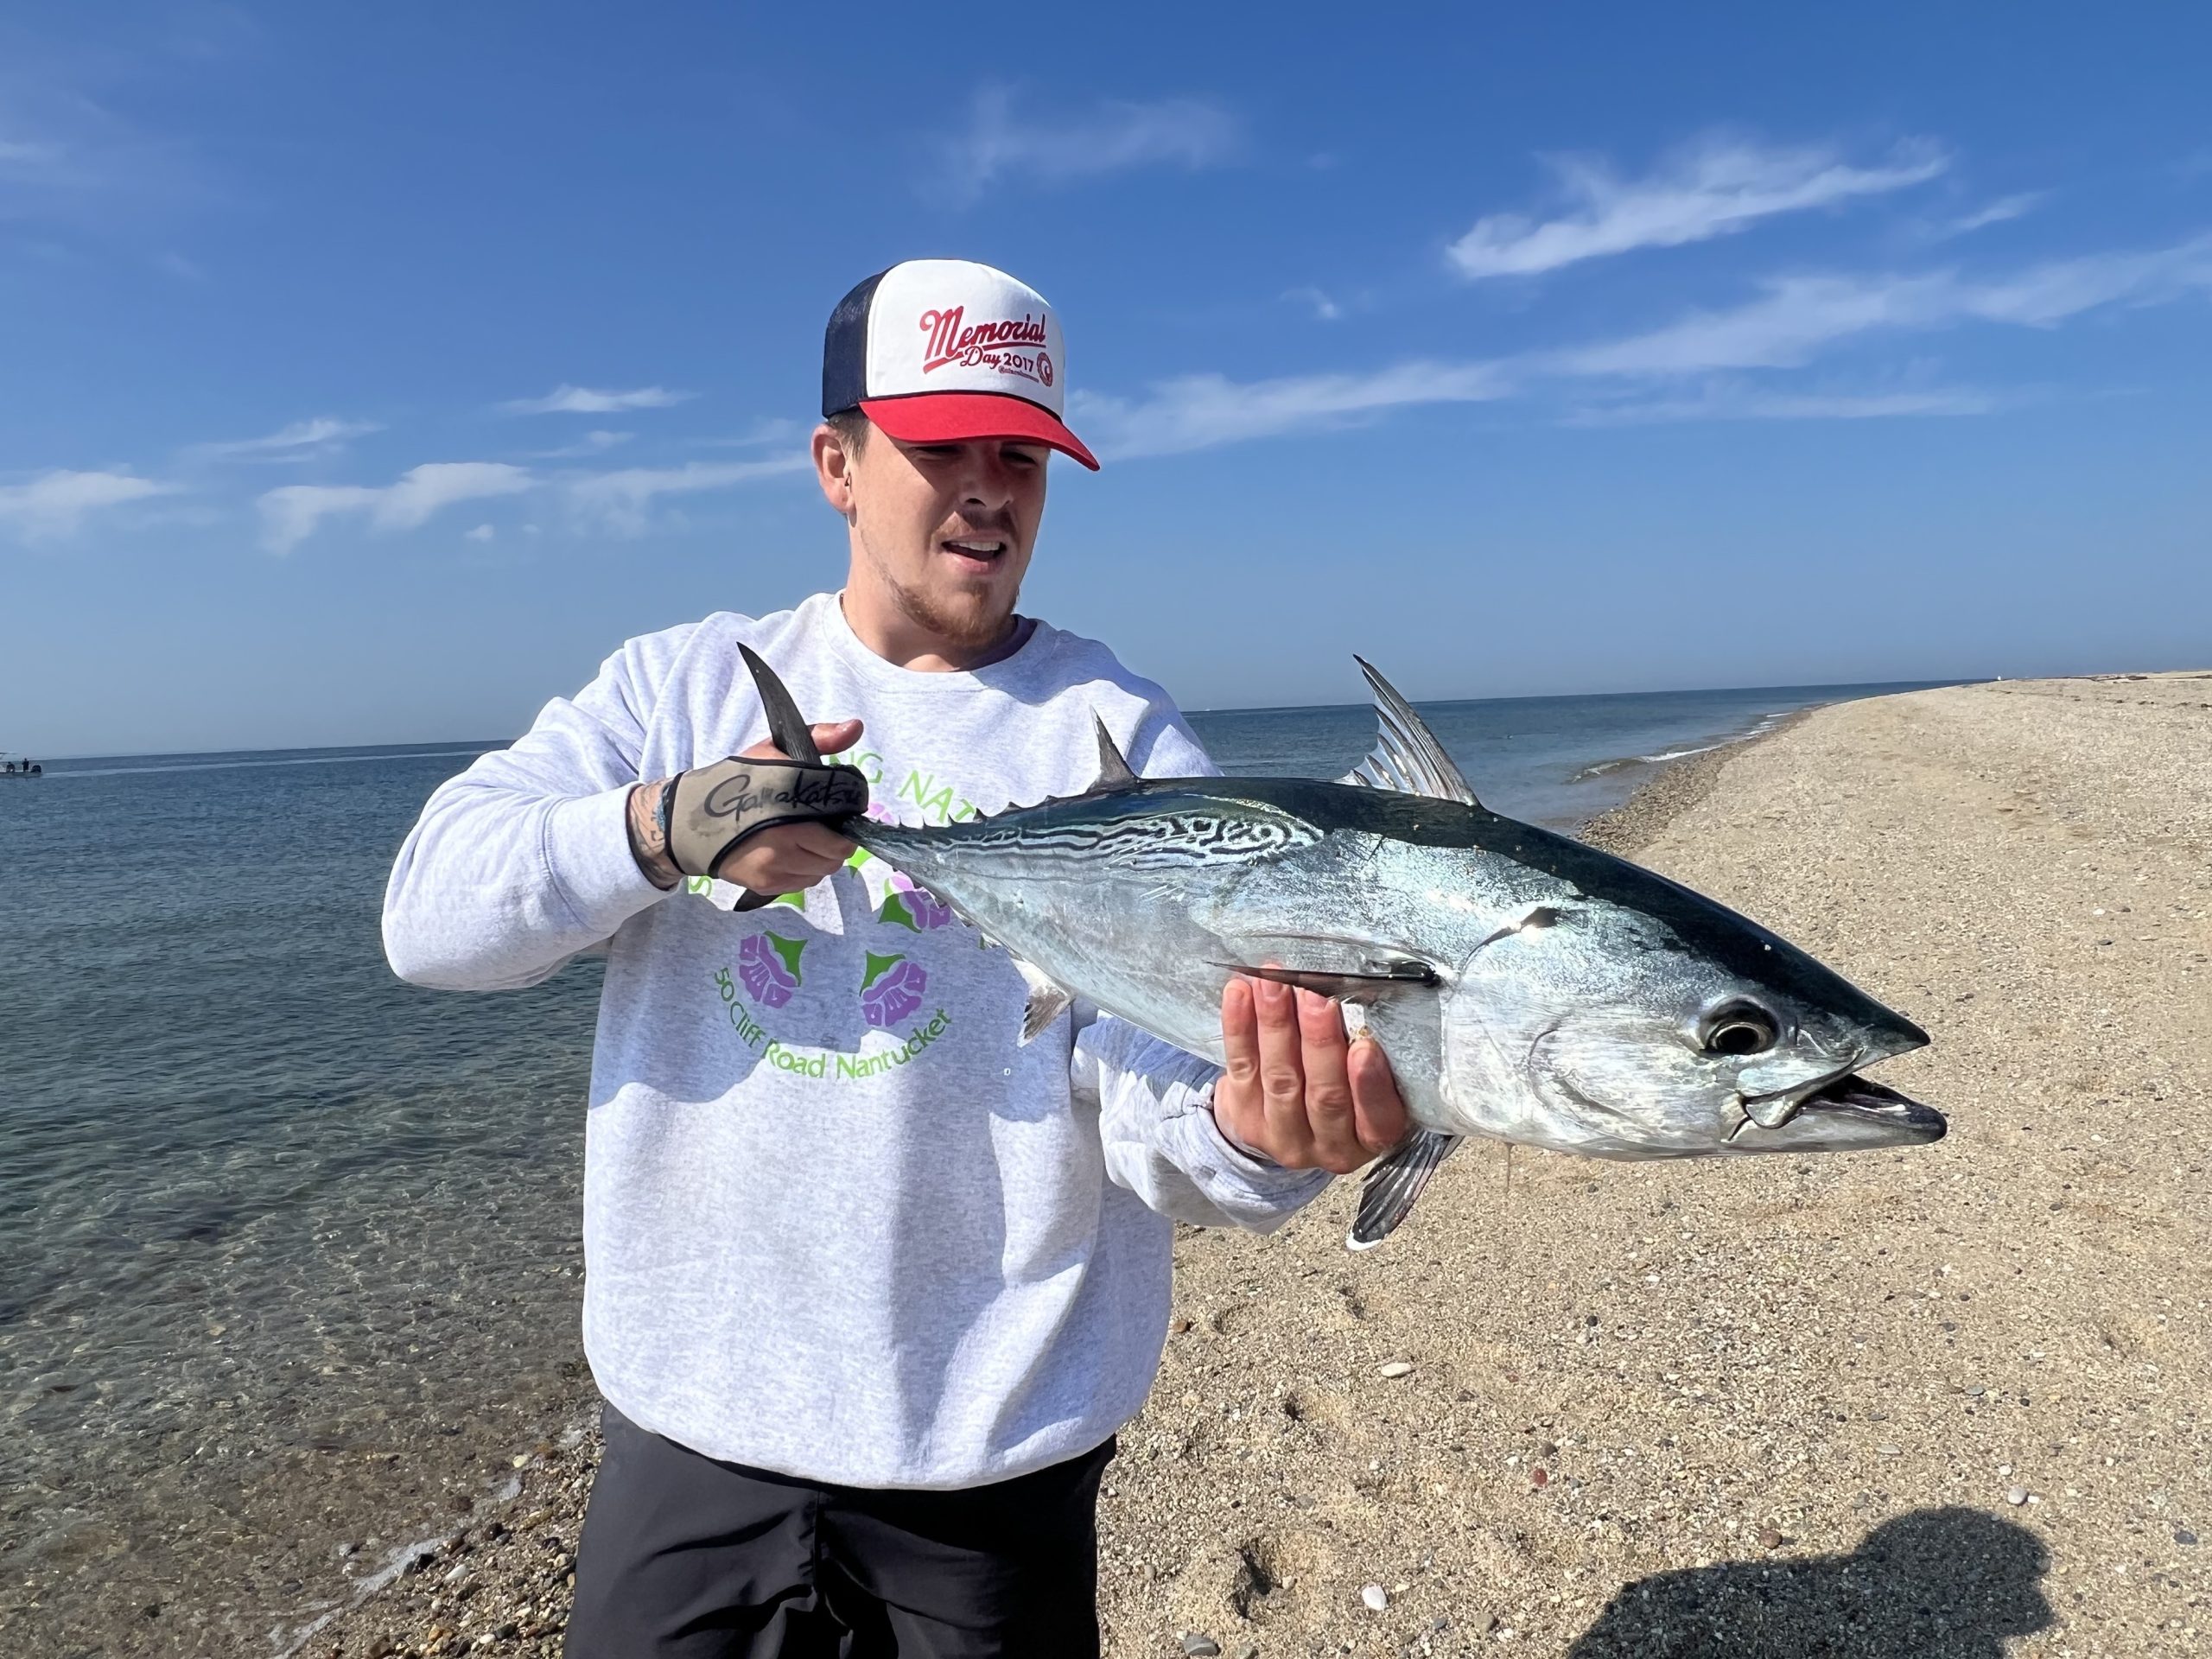 Cape Cod Fishing Report - September 10, 2020 - On The Water